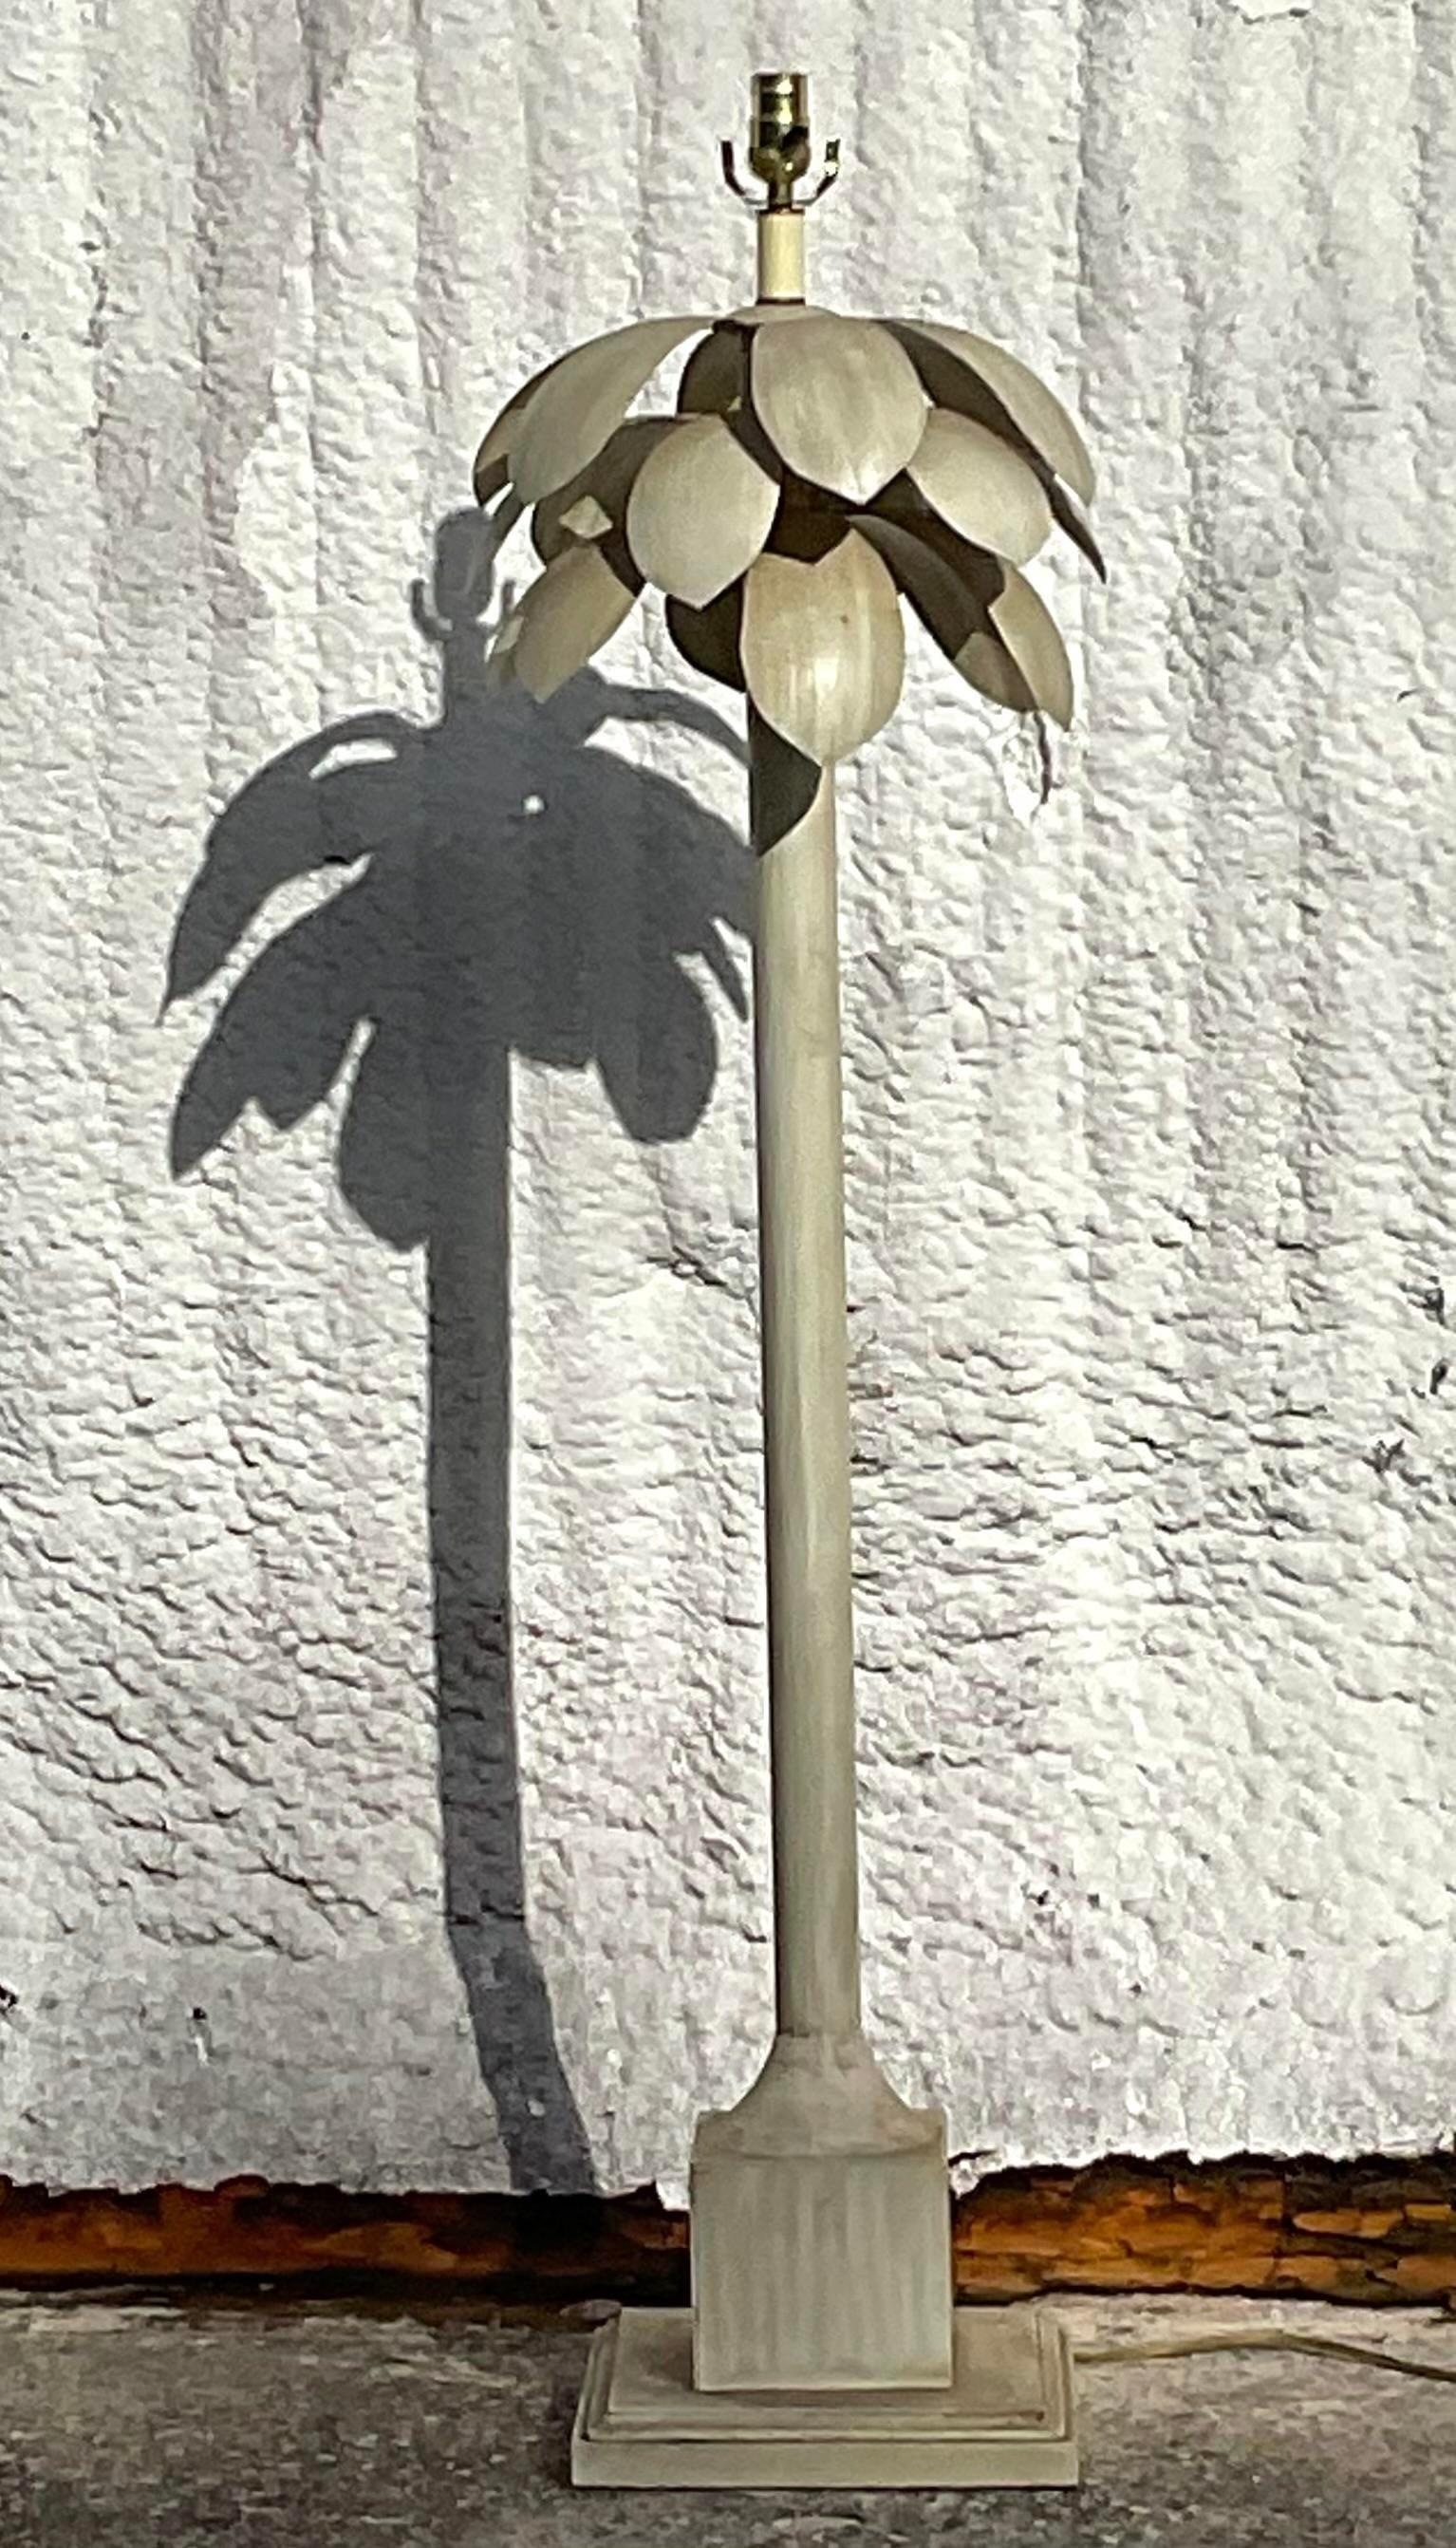 A fabulous vintage Coastal floor lamp. A chic palm tree design with heavy palm fronds at the top. Painted metal frame in an ecru color. Acquired from a Palm Beach estate.